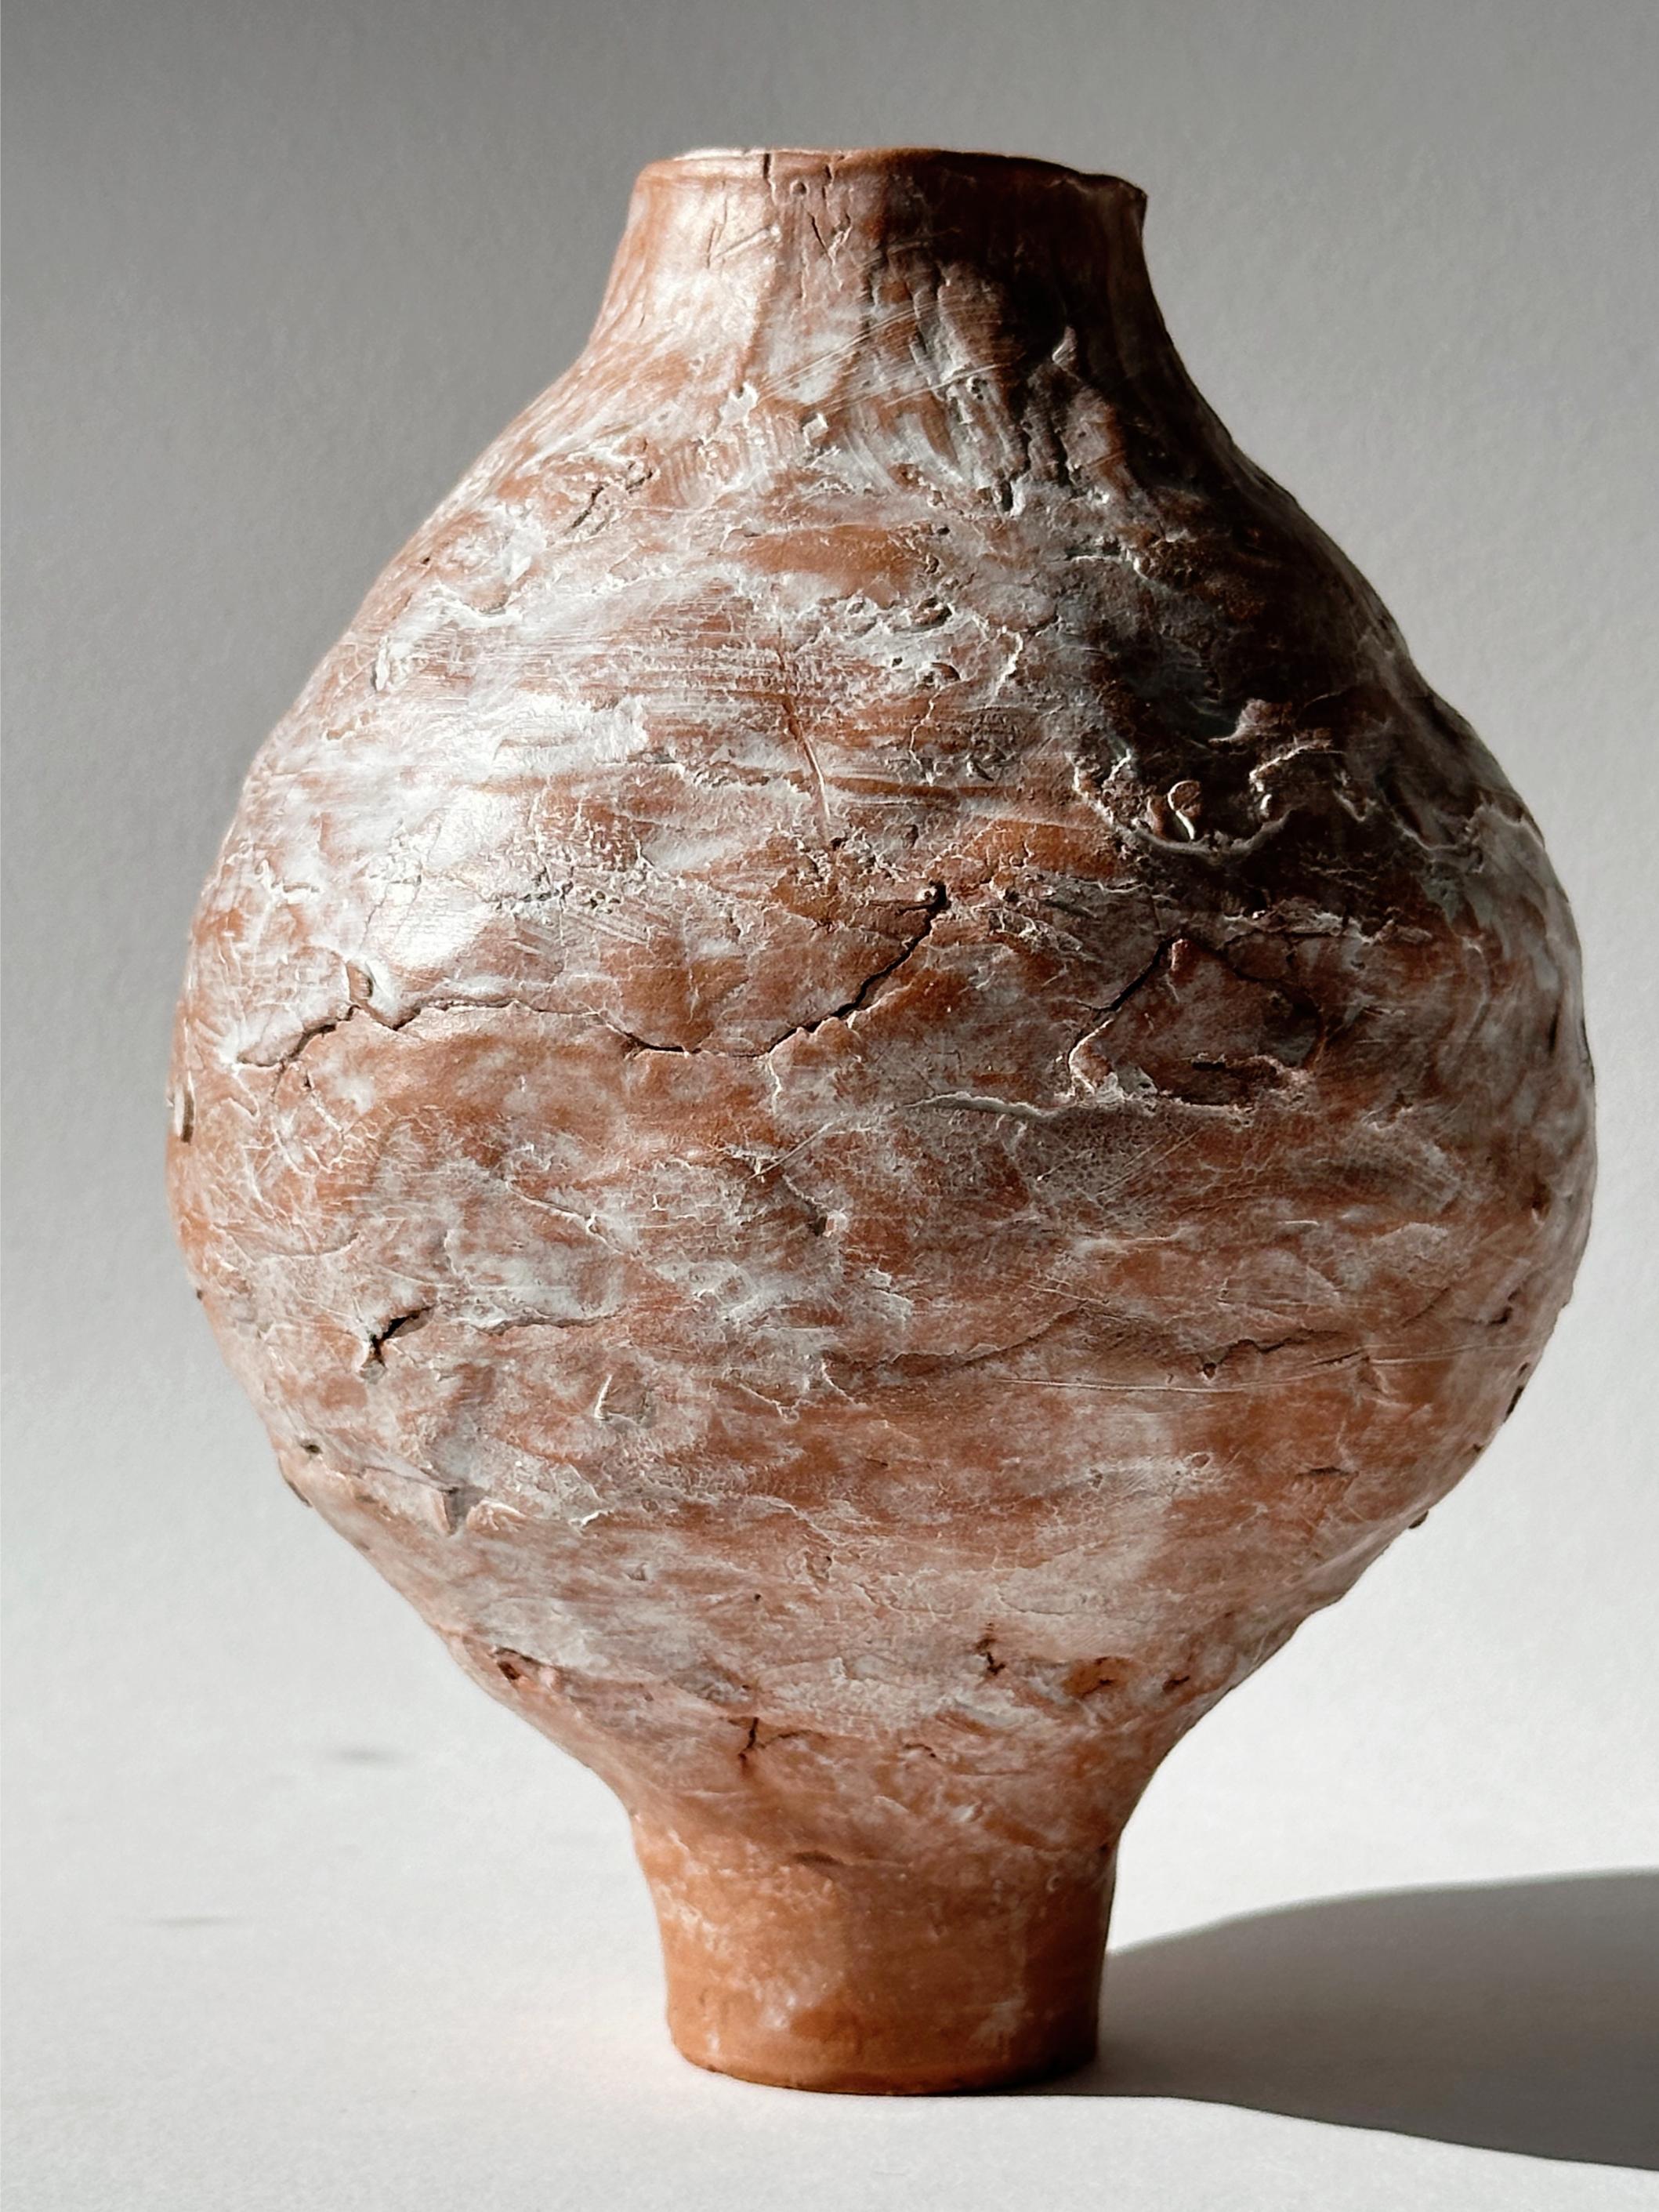 Terracotta Moon Jar No 3 by Elena Vasilantonaki
Unique
Dimensions: ⌀ 13 x H 17 cm (Dimensions may vary)
Materials: Local Terracotta Clay from the Island of
Crete

Growing up in Greece I was surrounded by pottery forms that have changed little since